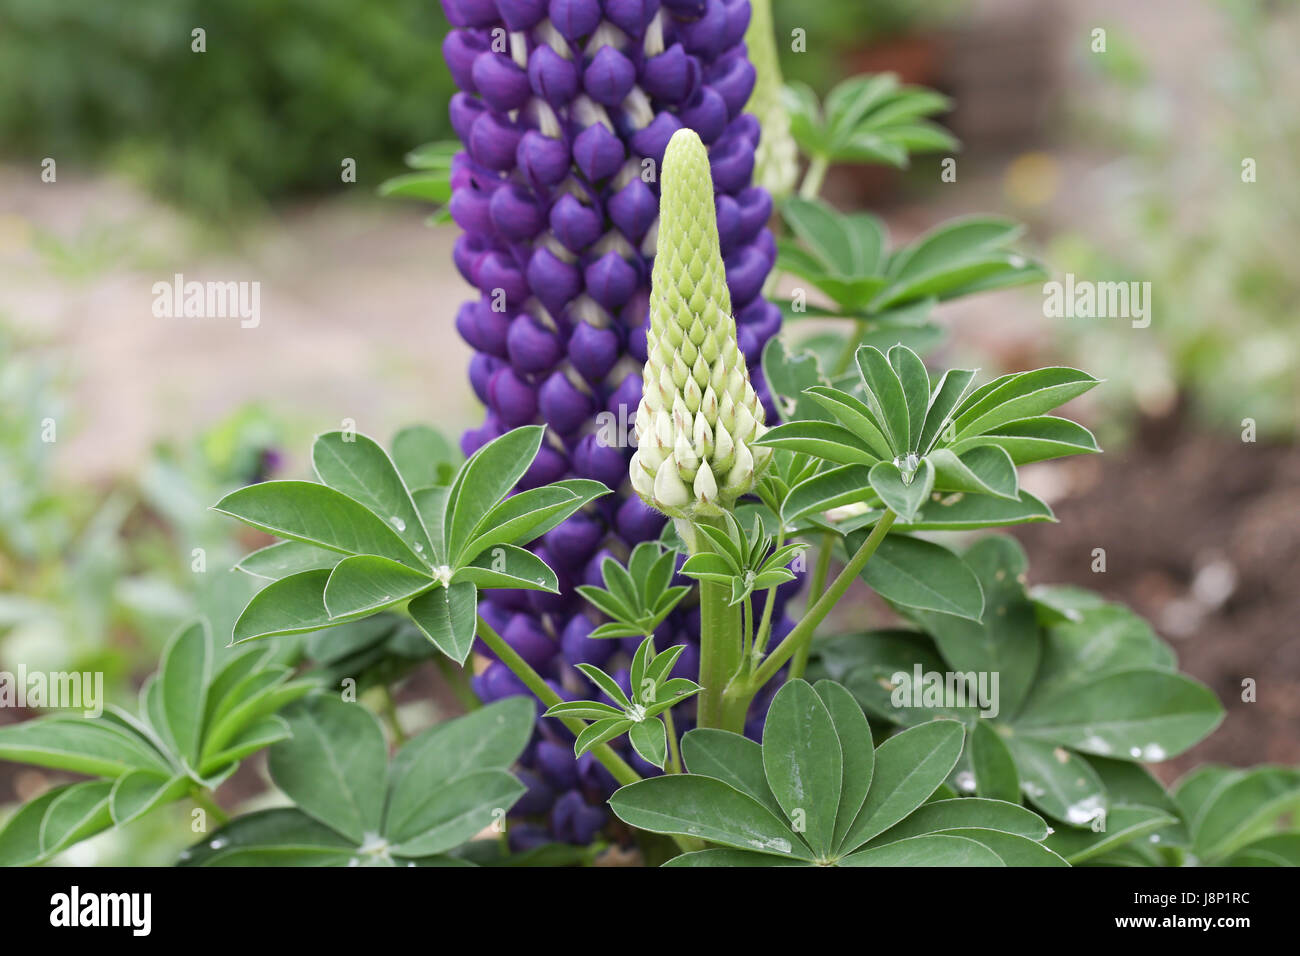 Bud, mature flowers and foliage of the pollinator friendly Lupinus (Lupin) 'Persian Slipper' plant in a British garden, shortly after a rain shower. Stock Photo